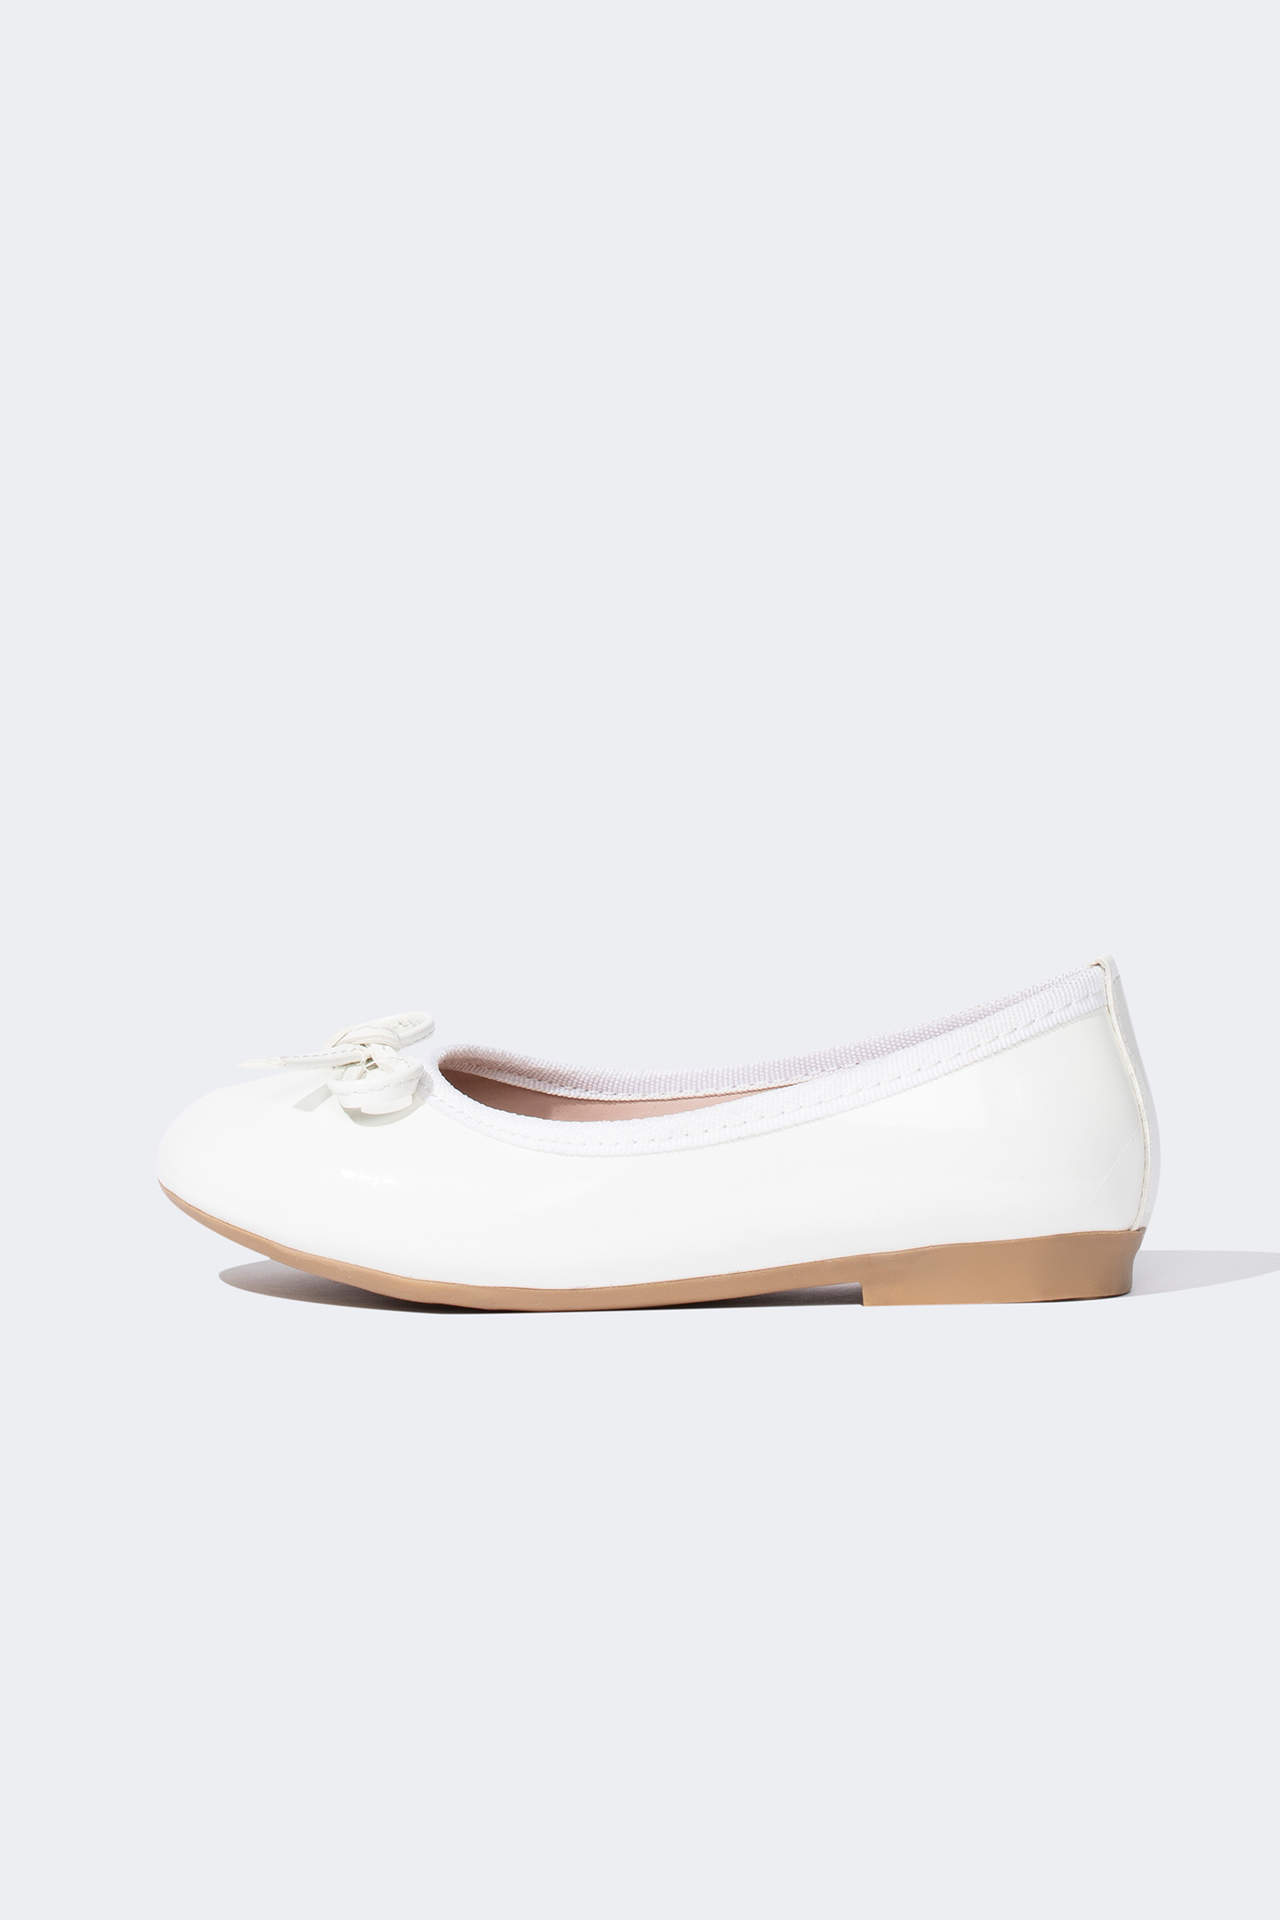 DEFACTO Girl's Flat Sole Faux Leather Patent Leather Flats